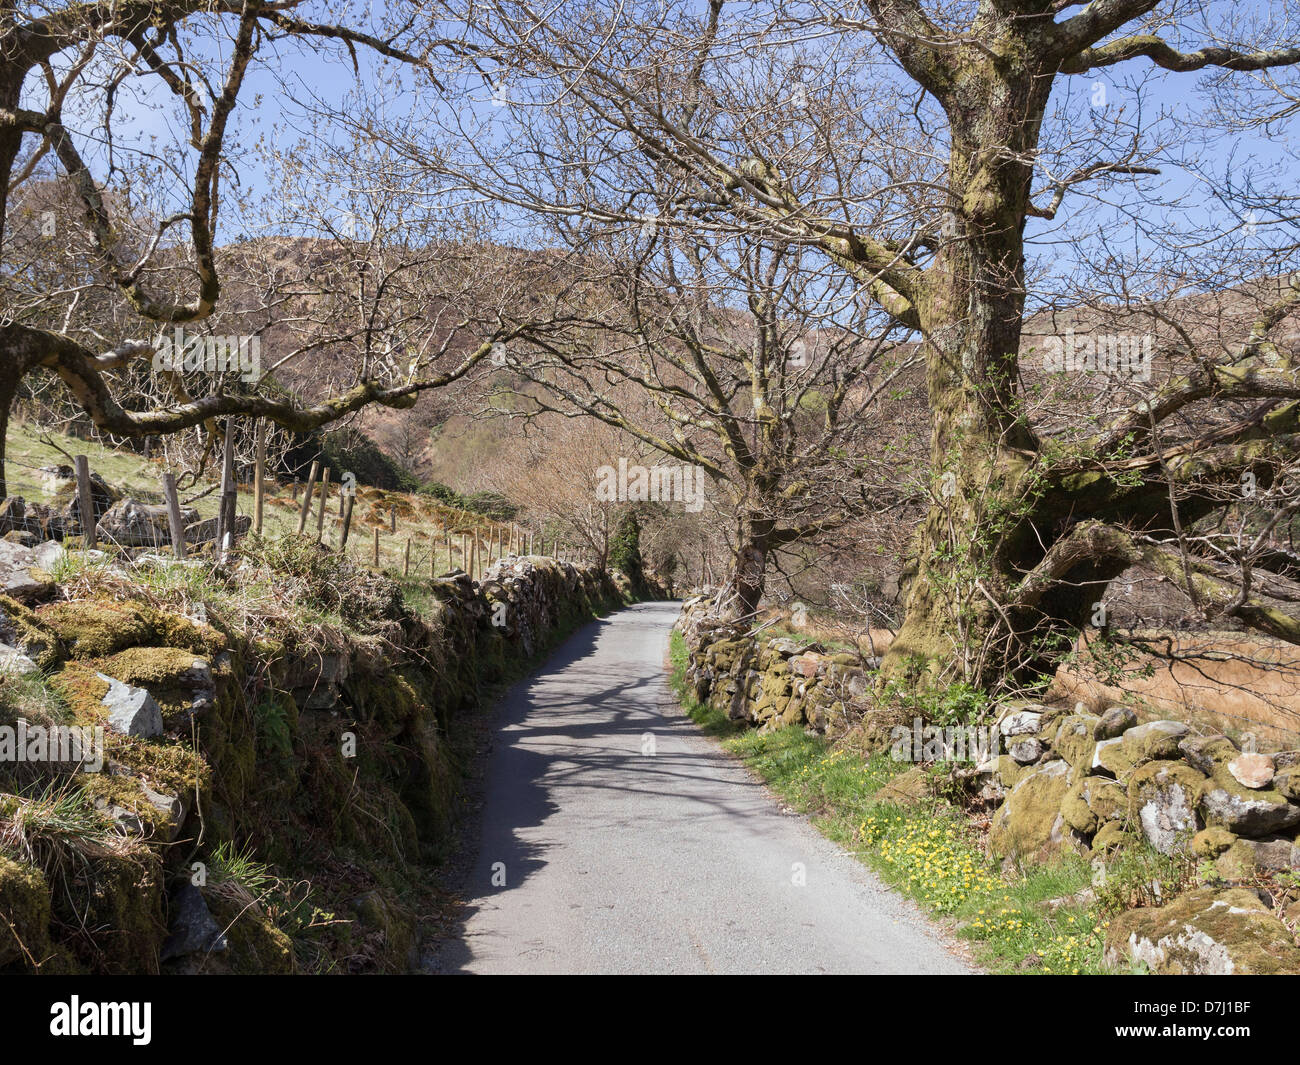 Quiet single track country lane with dry stone walls and bare trees in Nant Gwynant valley, Snowdonia, Gwynedd, North Wales, UK Stock Photo